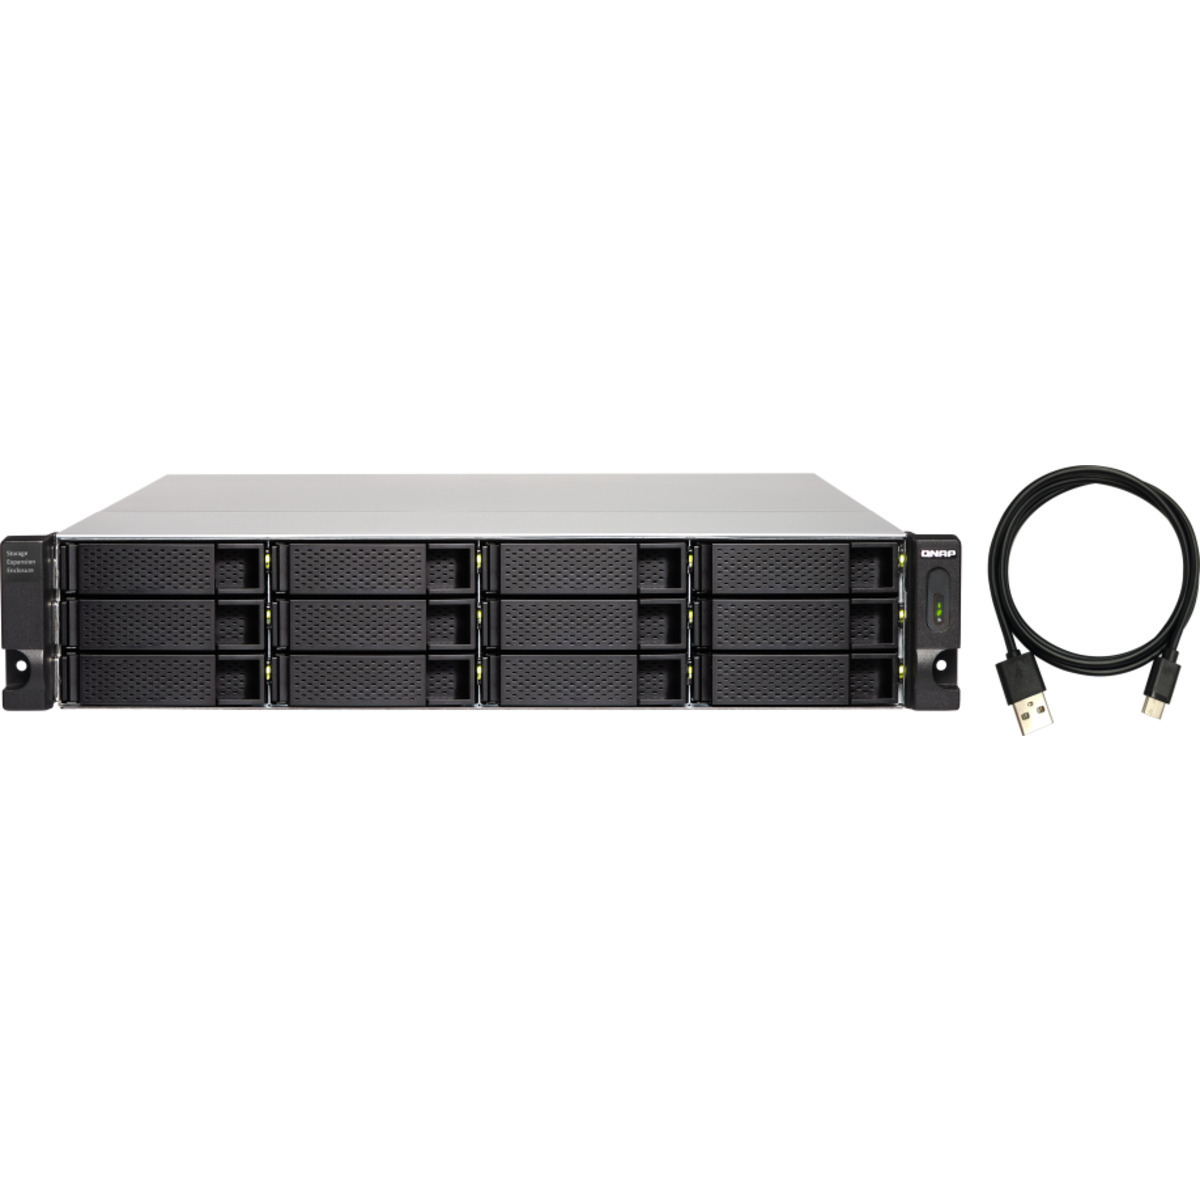 buy $4399 QNAP TL-R1200C-RP External Expansion Drive 96tb RackMount Expansion Enclosure 12x8000gb Western Digital Gold WD8004FRYZ 3.5 7200rpm SATA 6Gb/s HDD ENTERPRISE Class Drives Installed - Burn-In Tested - nas headquarters buy network attached storage server device das new raid-5 free shipping simply usa TL-R1200C-RP External Expansion Drive